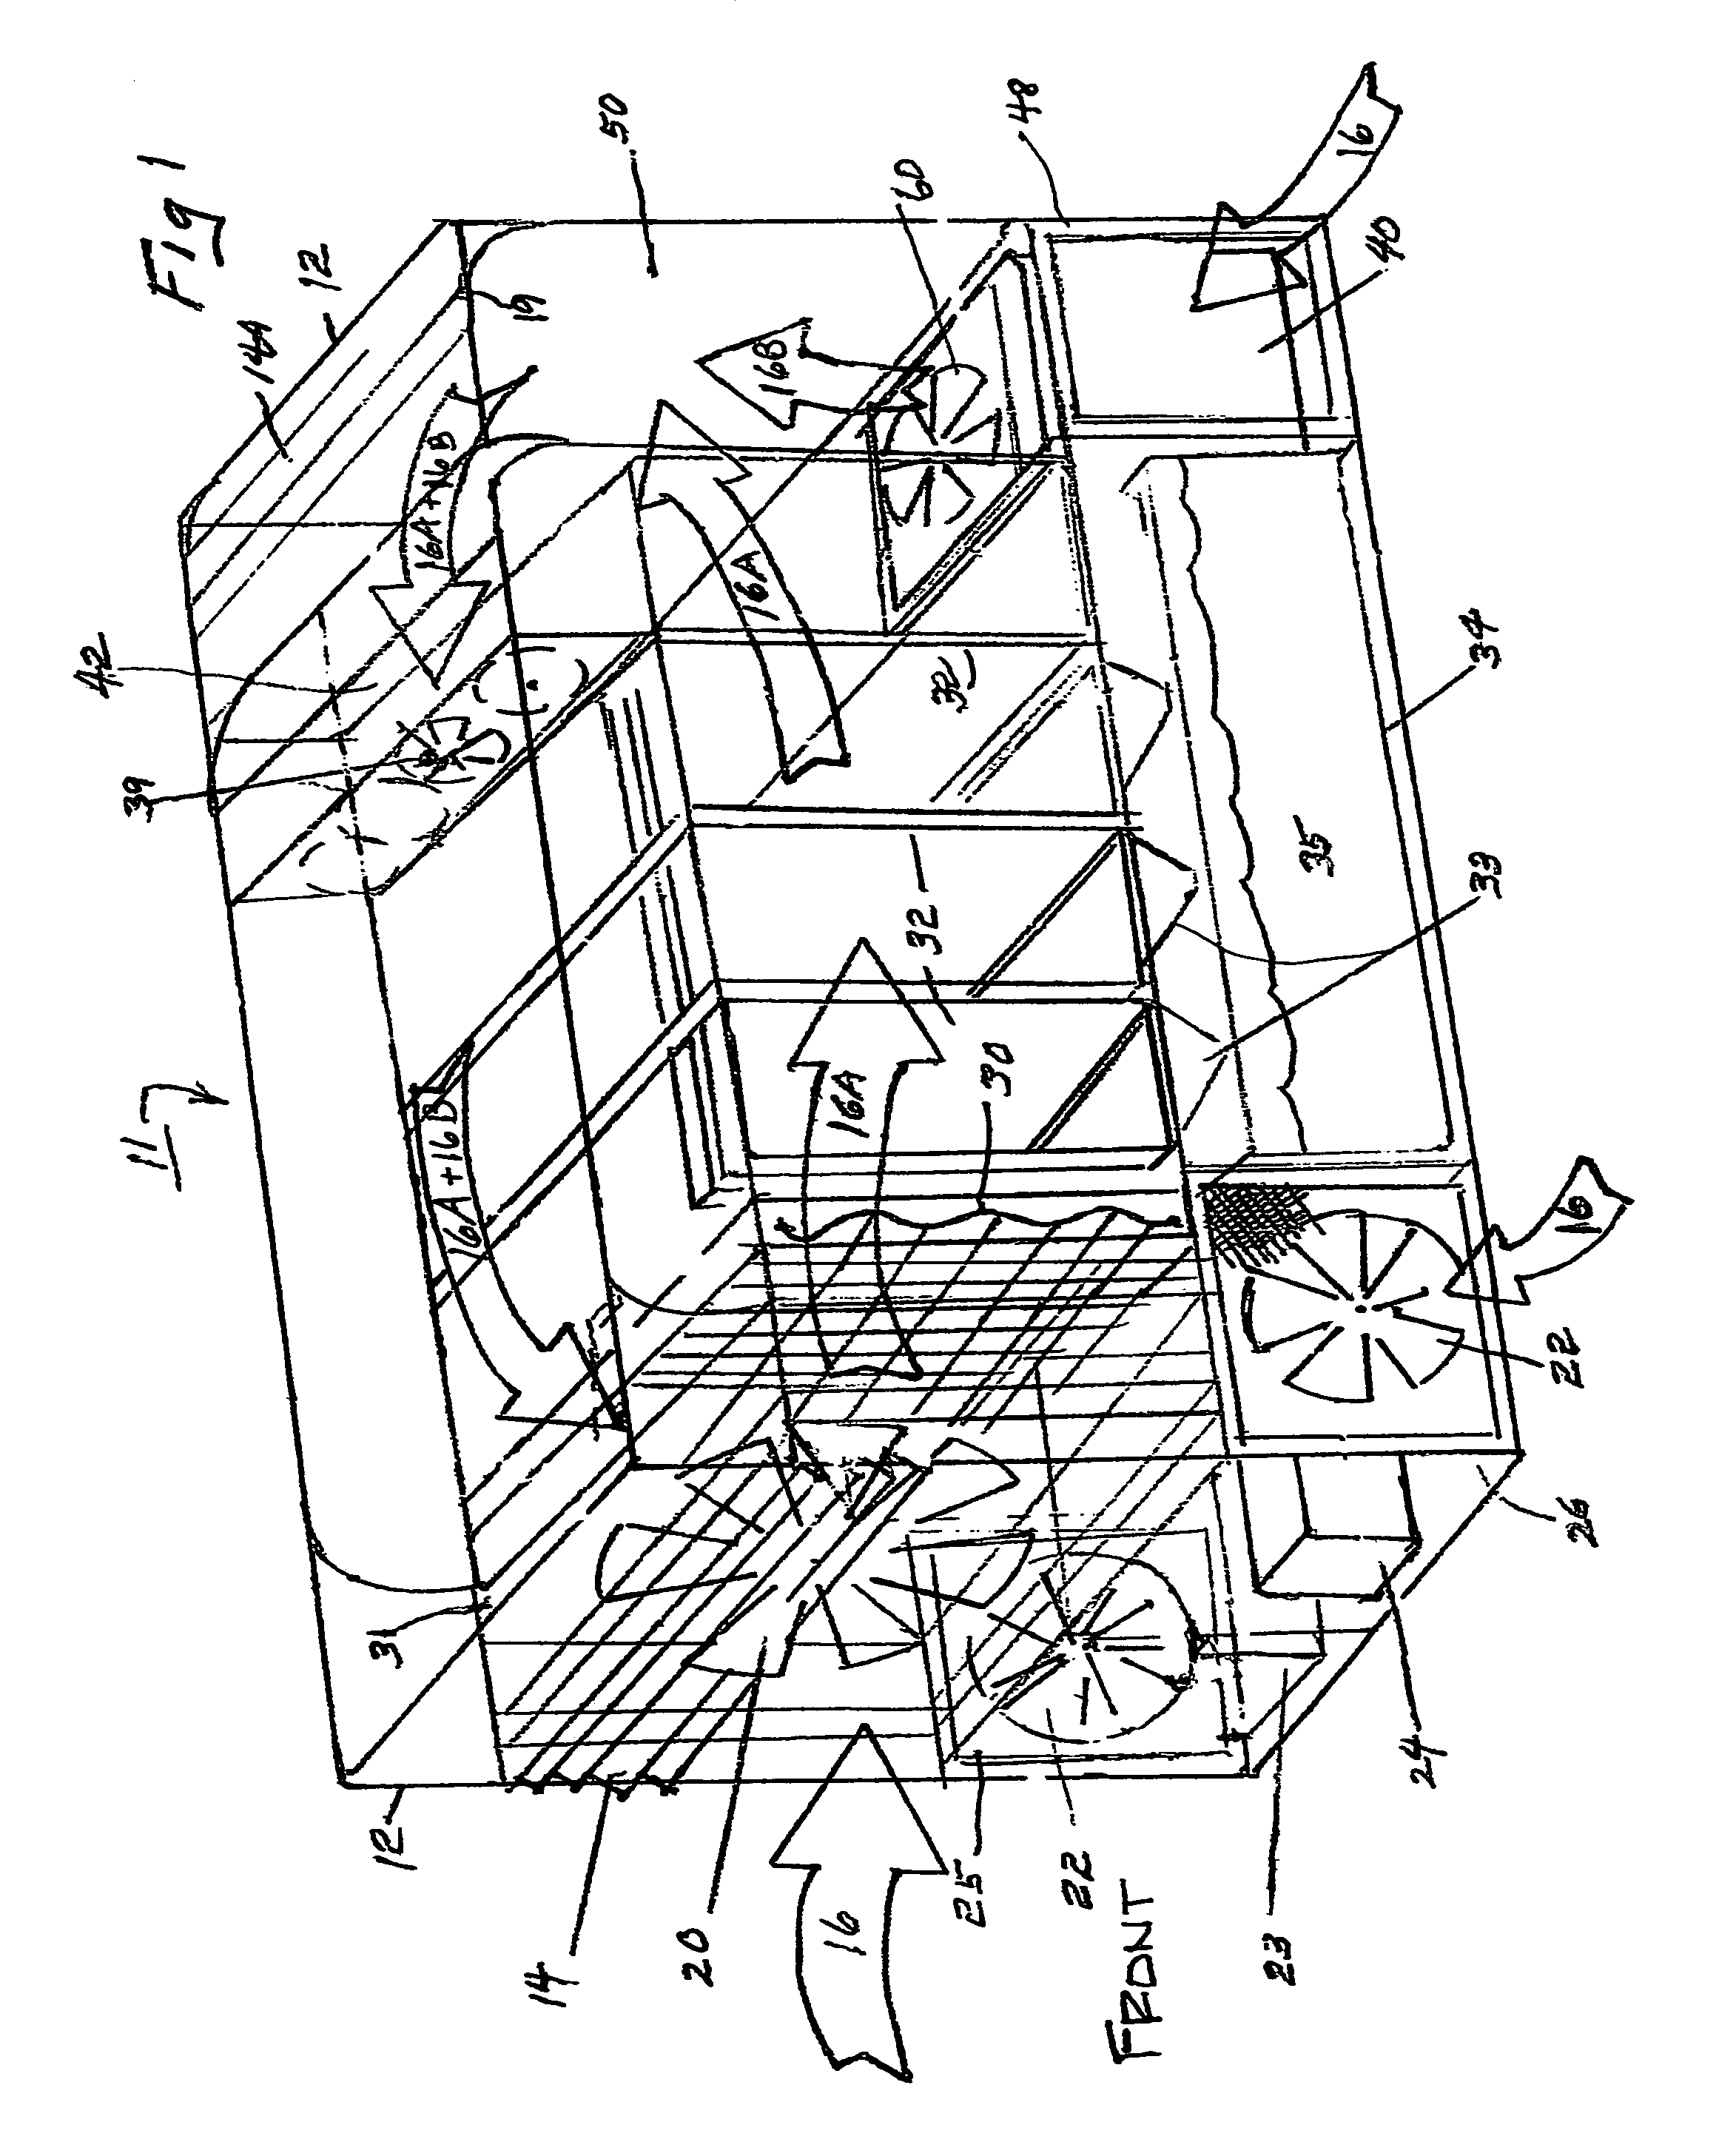 Apparatus and method for producing water from air